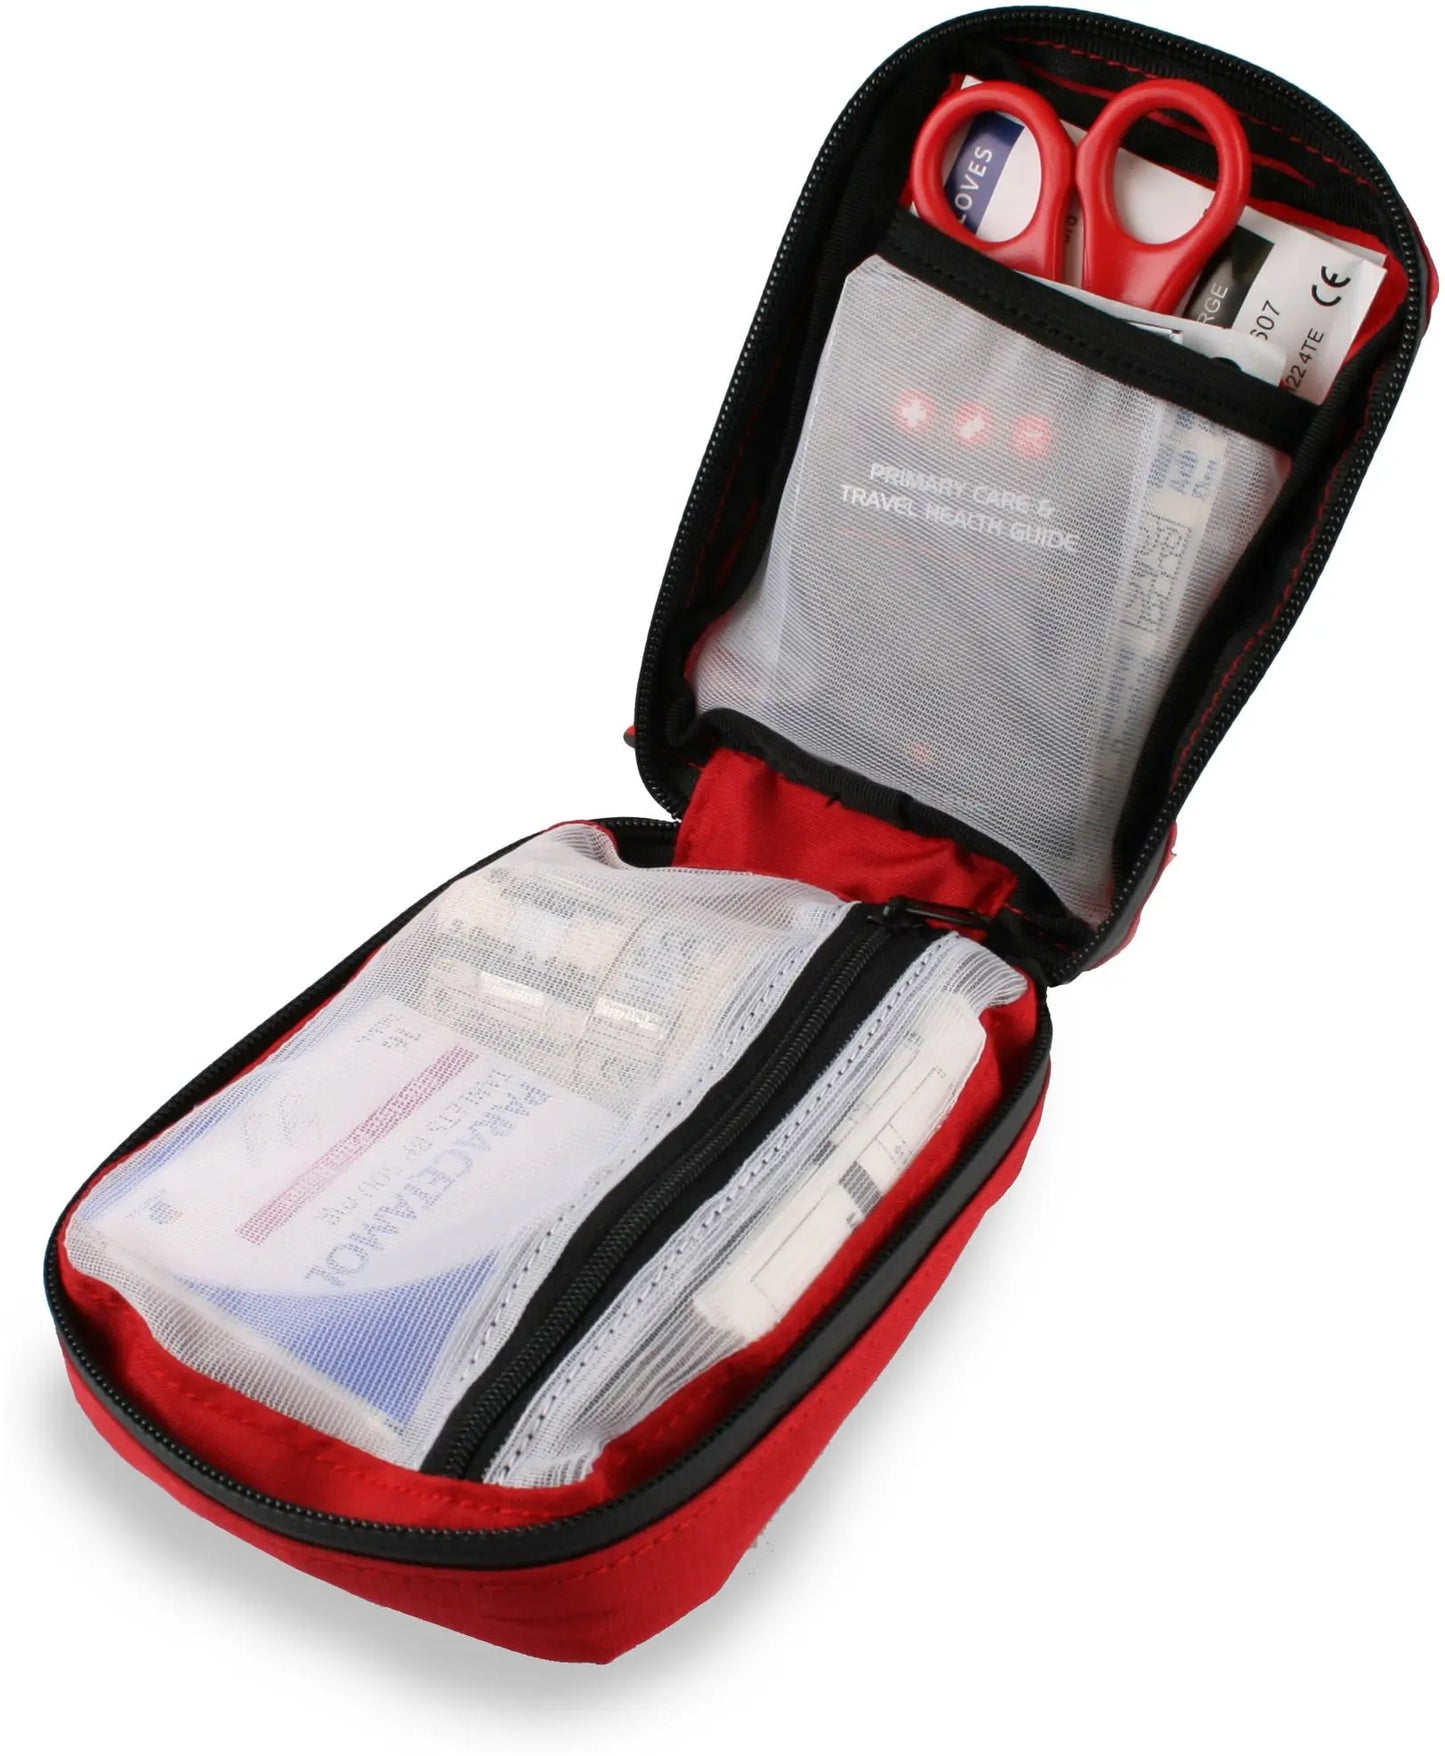 Trek First Aid Kit by Life Systems